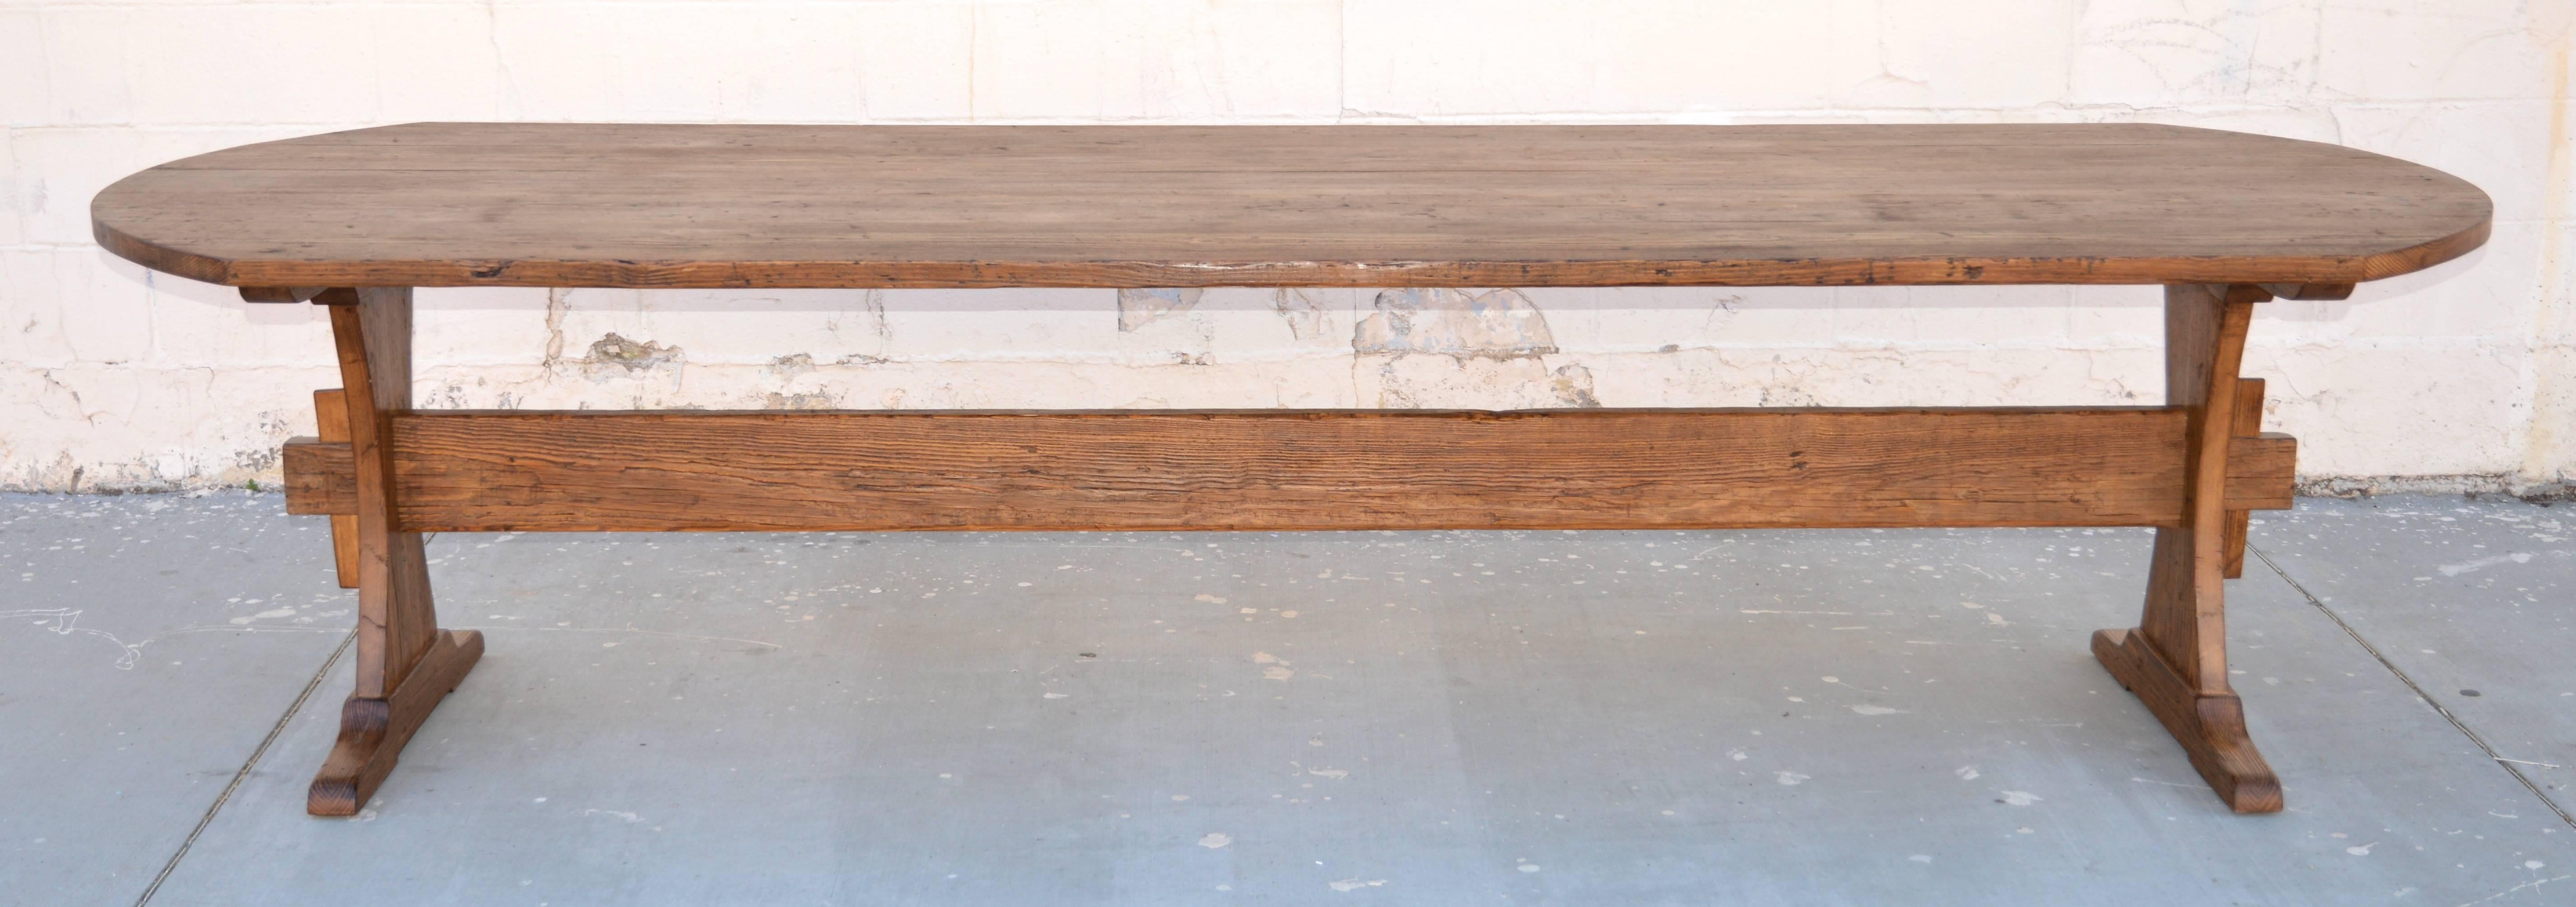 This made-to-order dining table built is made in hand selected, reclaimed heart-pine. Size shown here: 120 x 43 inches.

Because each table is bench-made in our own Los Angeles workshop you can influence all aspects of design, including size, wood